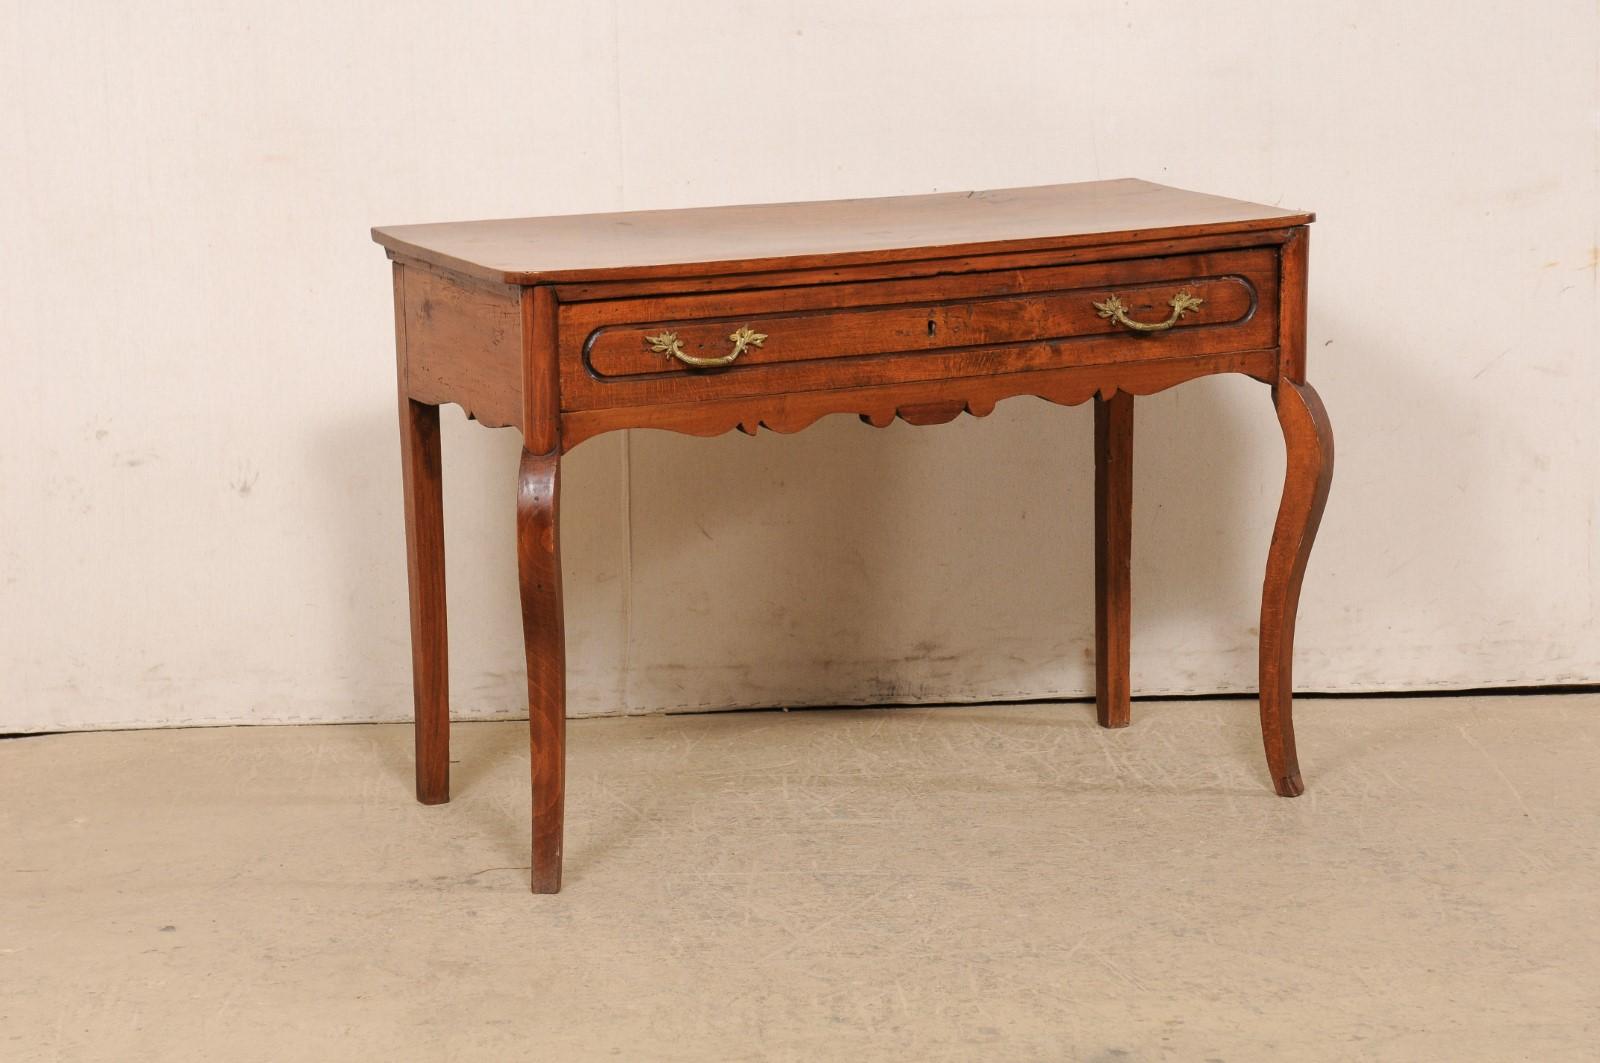 An Italian walnut table with drawer from the 18th century. This antique table from Italy has a rectangular-shaped top with softly-rounded front corners which rests atop an apron that houses a full-sized drawer along its front side, and has a nicely